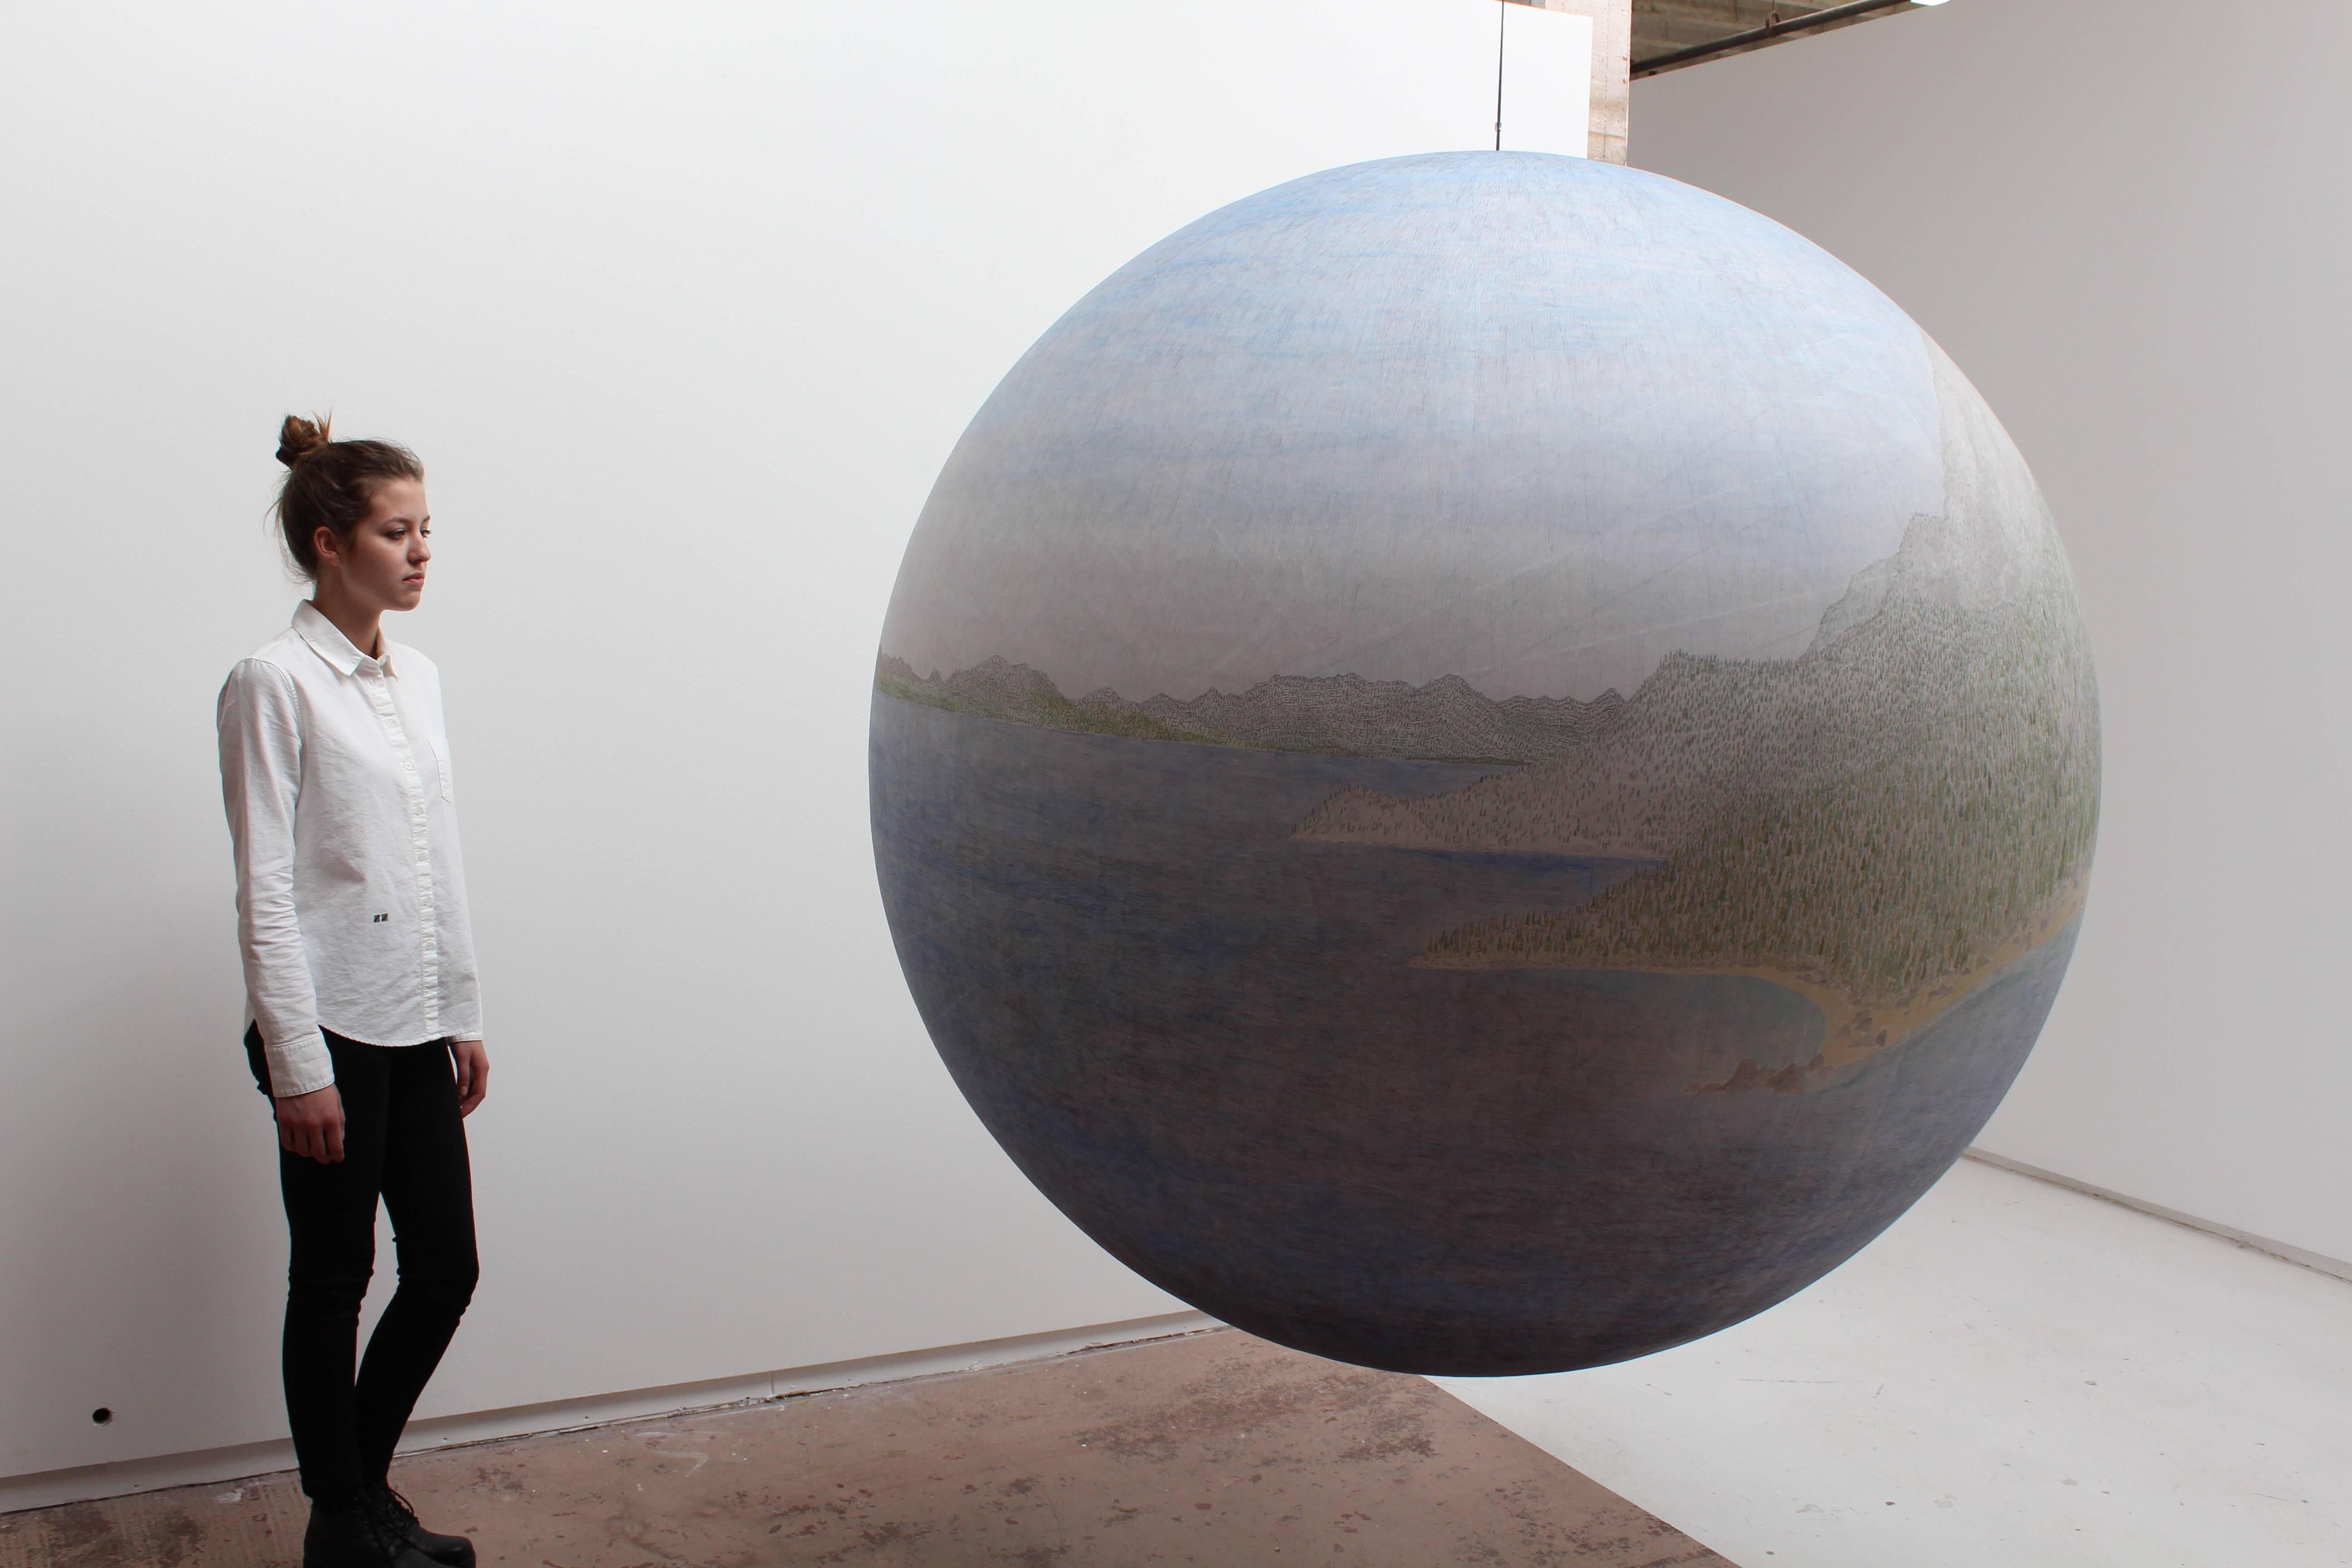 Around the Vast Blue - Sculpture by Russell Crotty